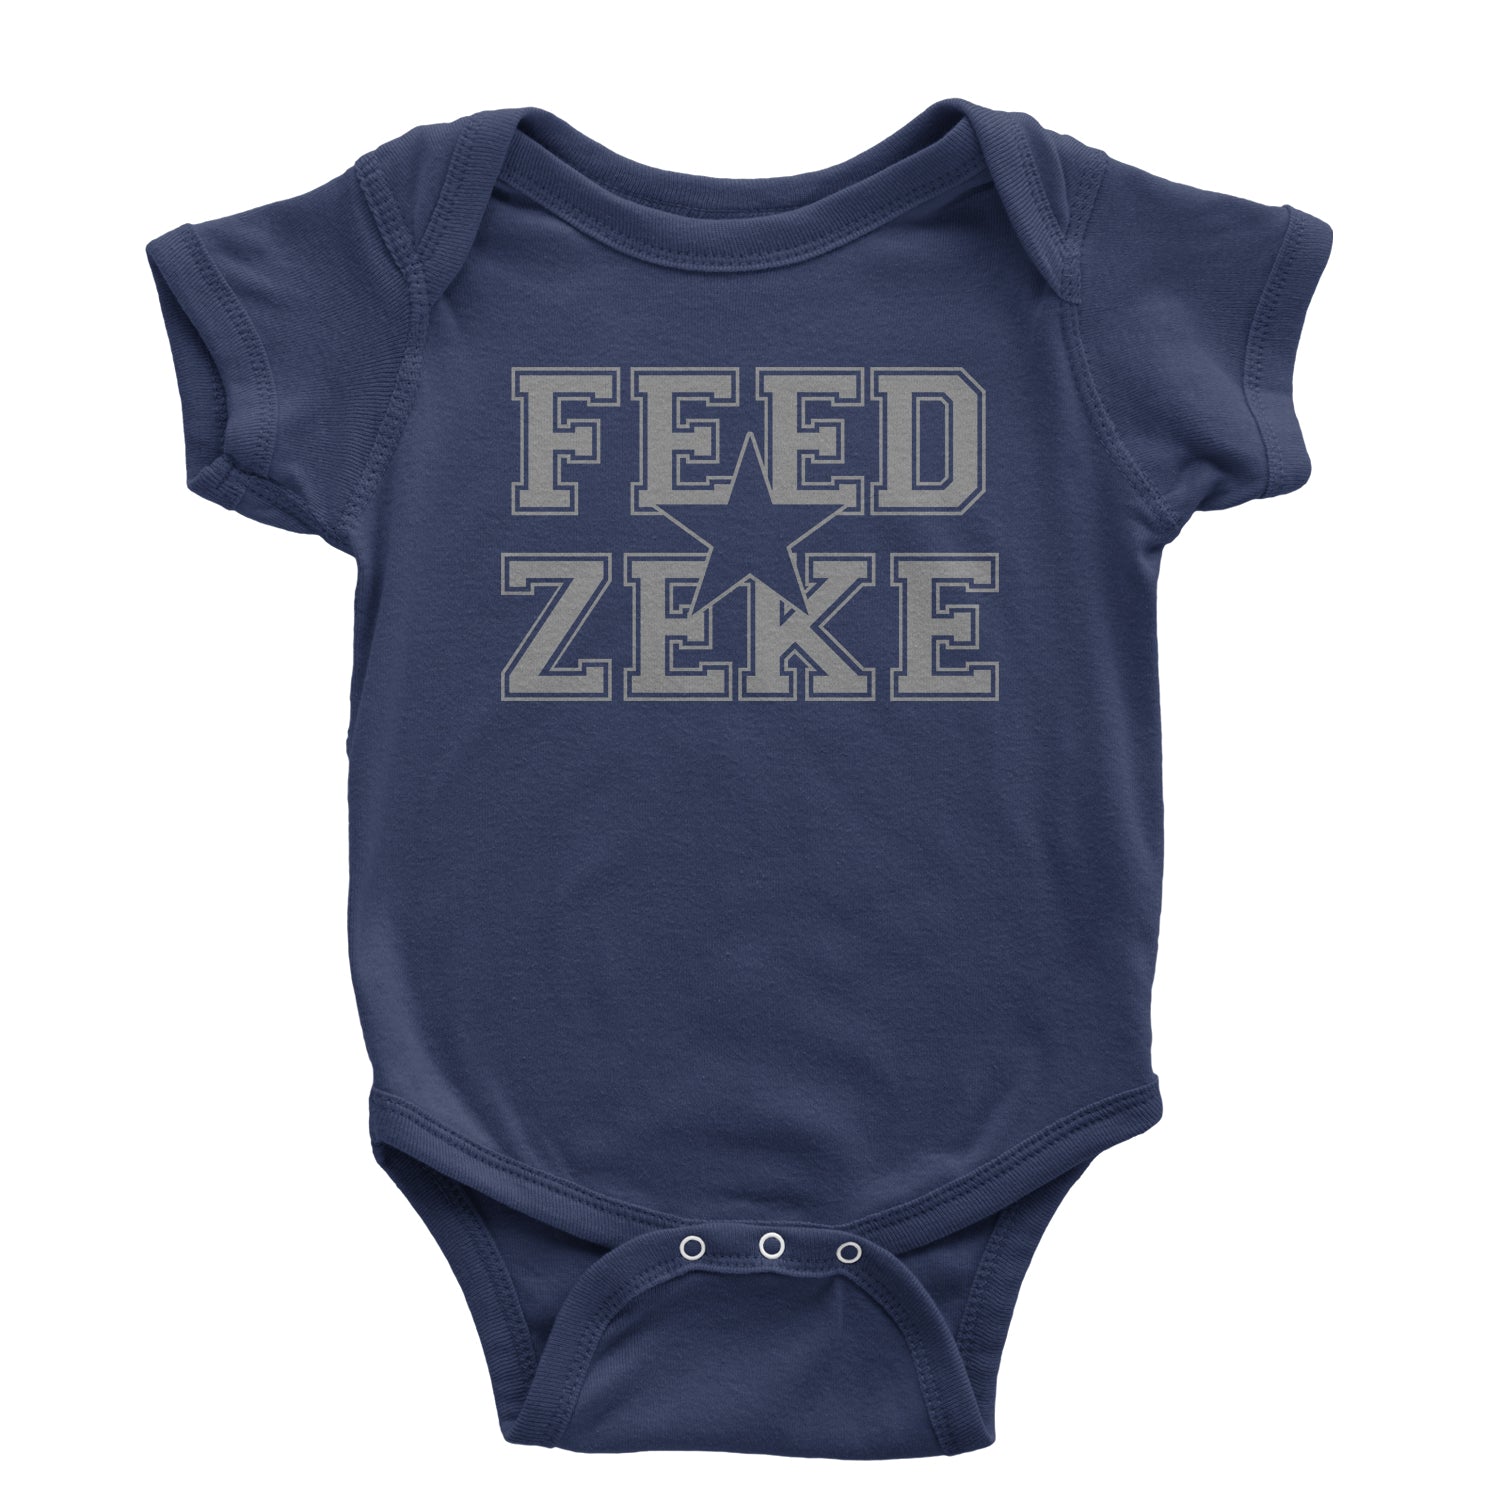 Feed Zeke Infant One-Piece Romper Bodysuit and Toddler T-shirt #expressiontees by Expression Tees